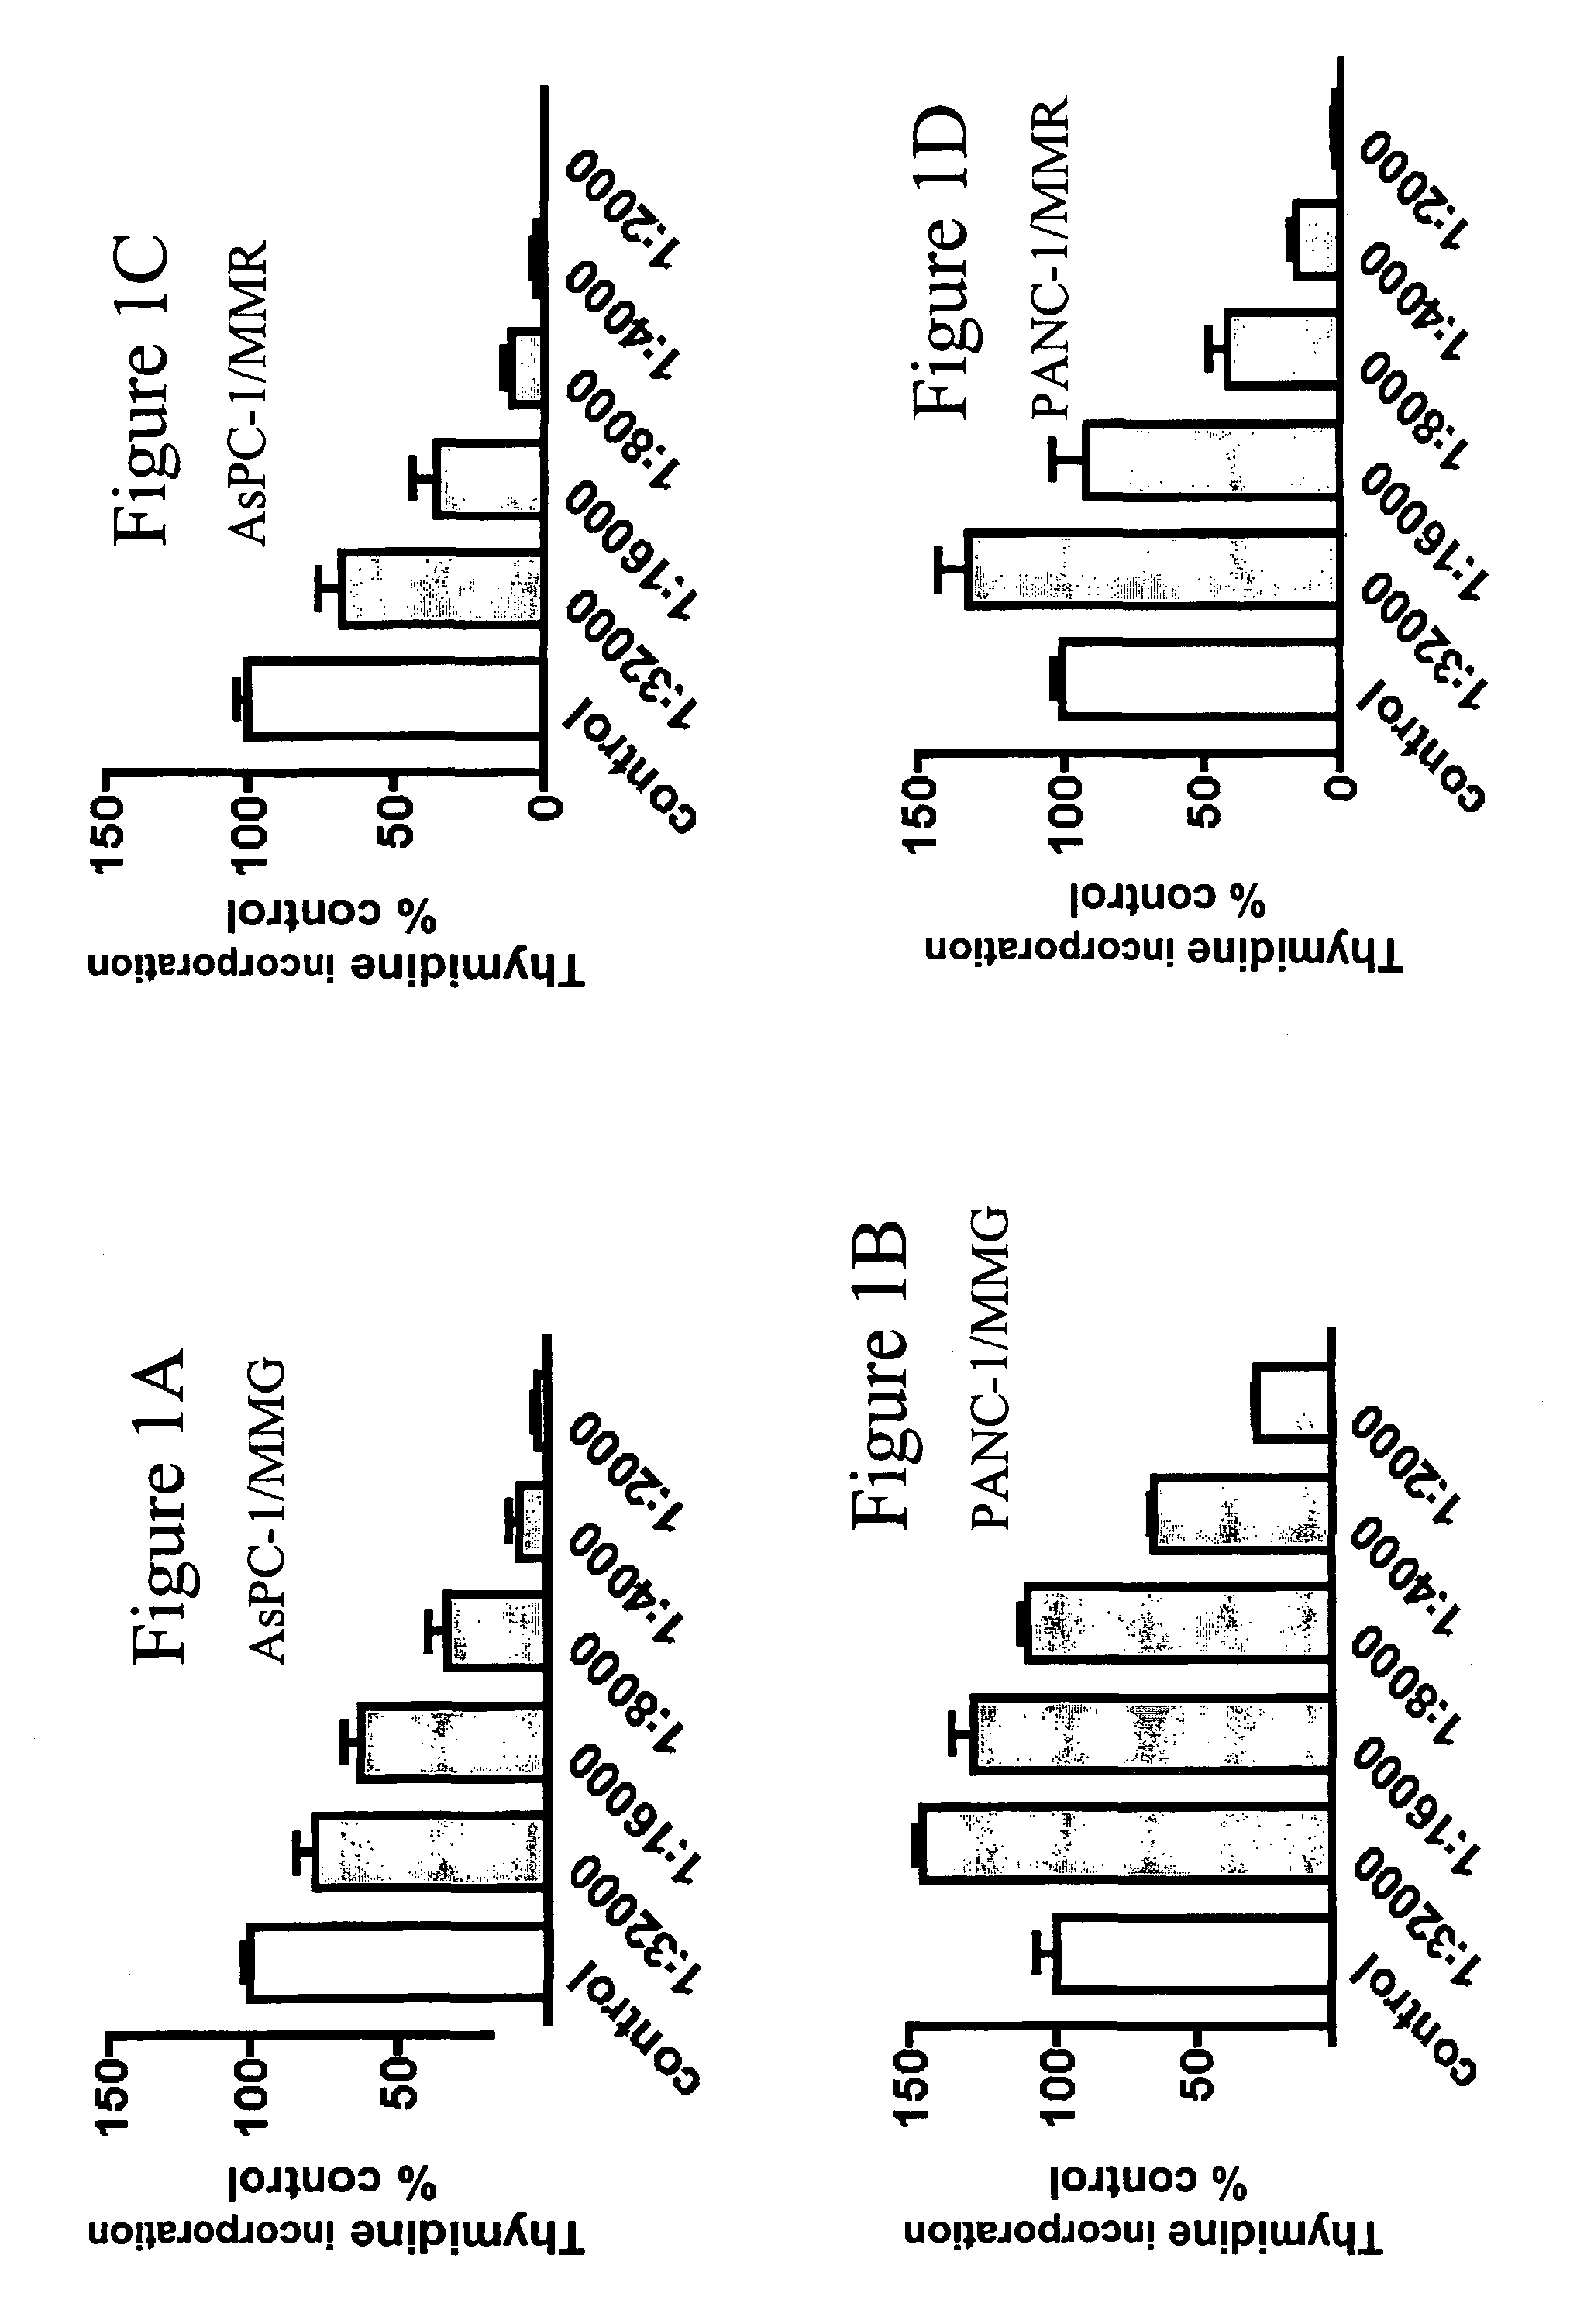 Compositions derived from Modiolus modiolus and methods for making and using same